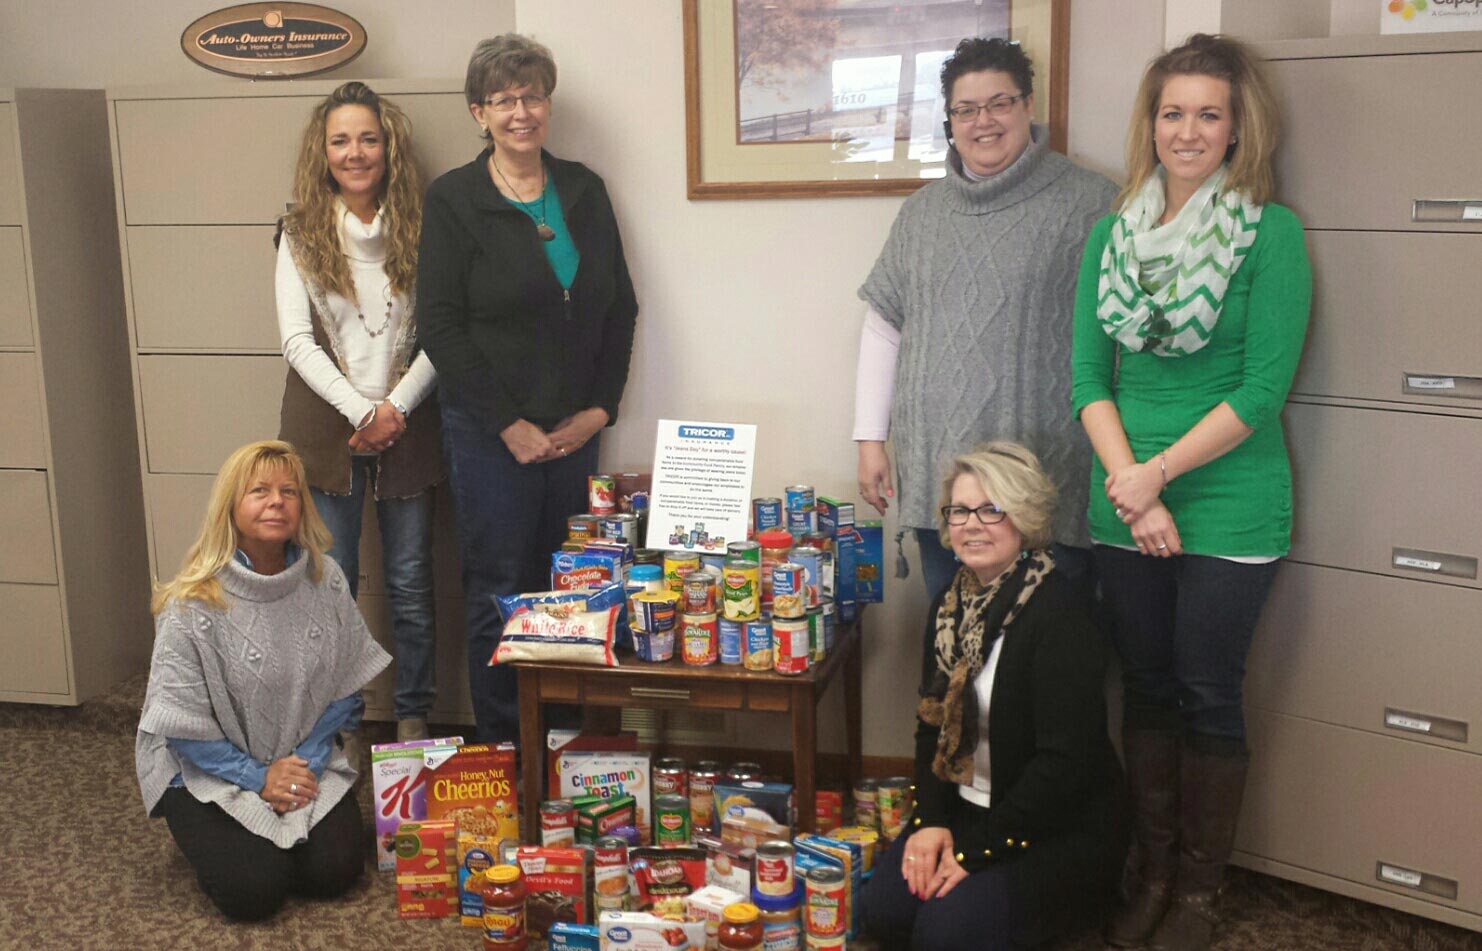 http://tricorinsurance.com/sites/tricorinsurance.com/assets/images/about-tricor/wisconsin-rapids-food-pantry.jpg